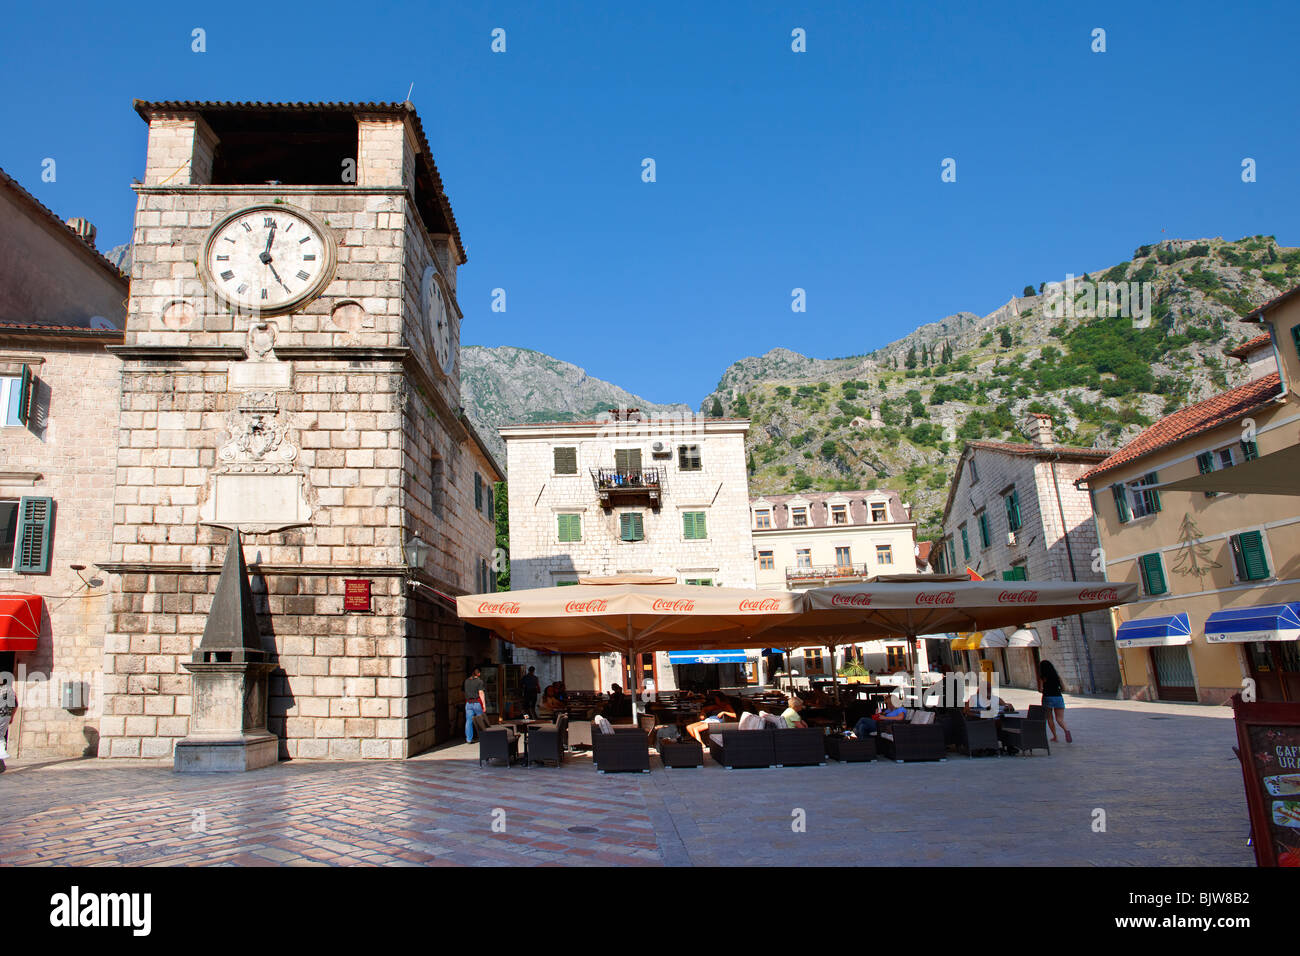 Squares of Arms, the main town square with the clock tower erected in 1602. Kotor, Montenegro. Stock Photo